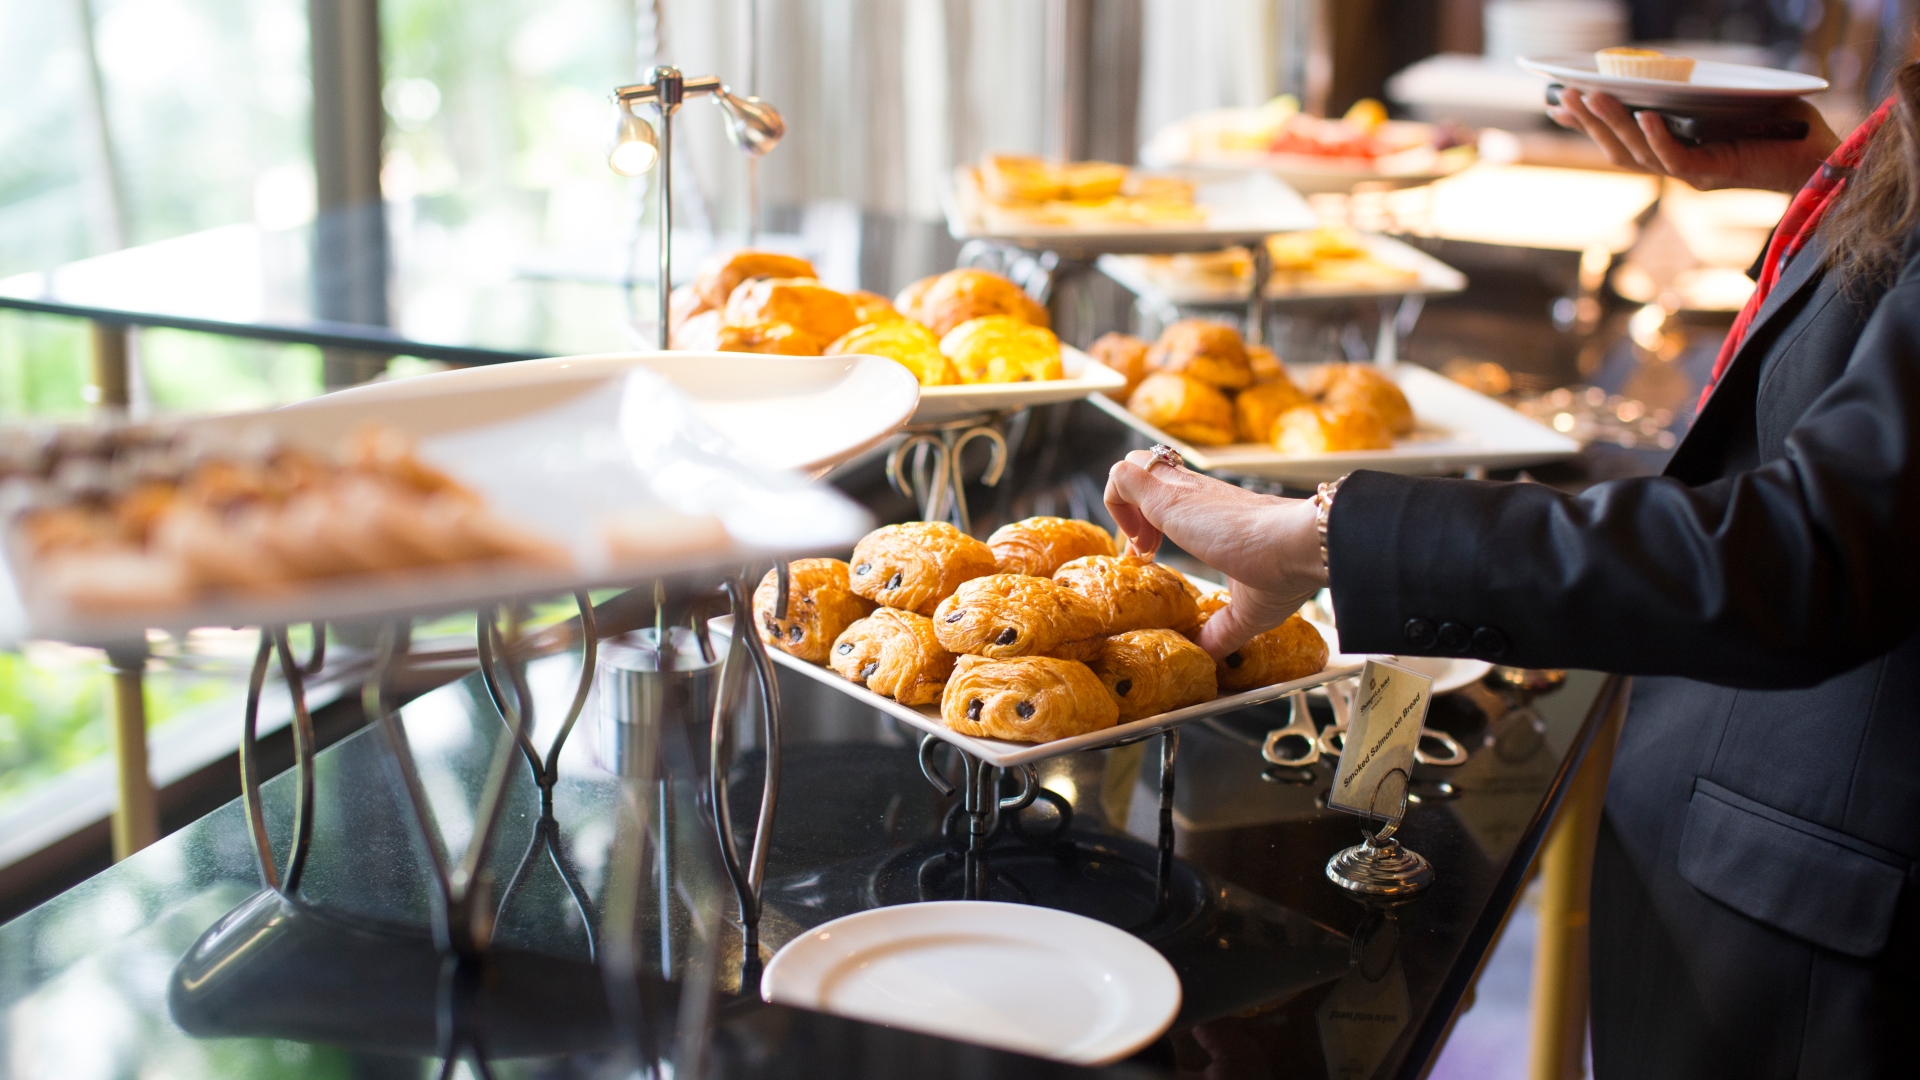 Hotel guest reveals unique buffet breakfast - and people have been left stunned